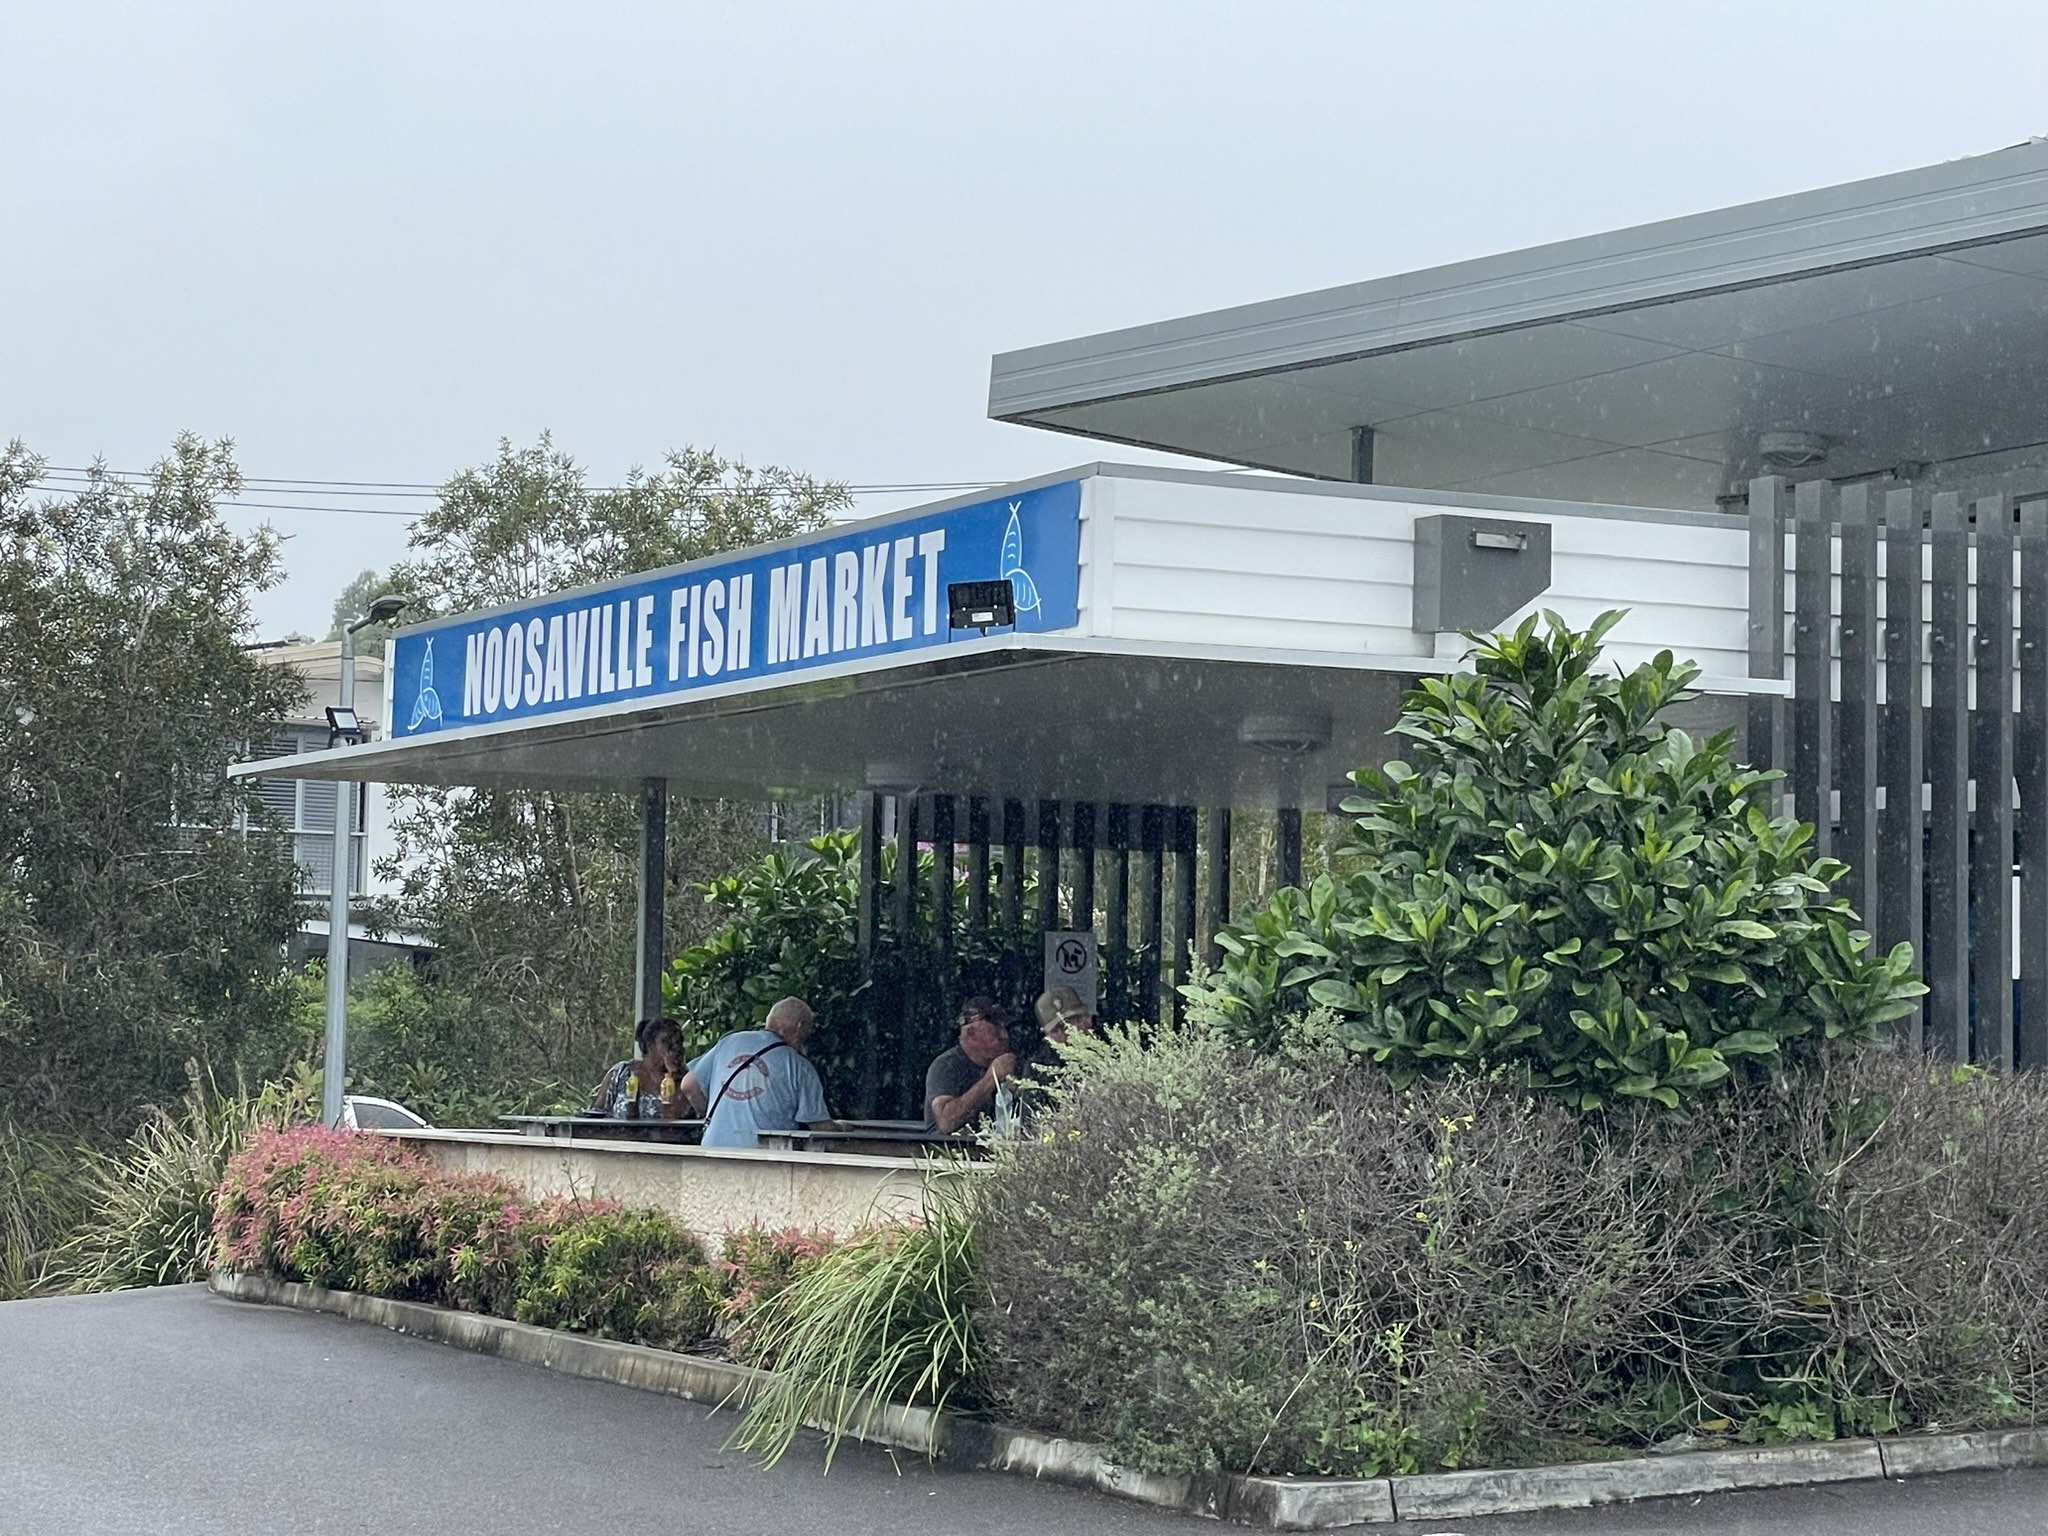 The Outside or Noosaville Fish Market